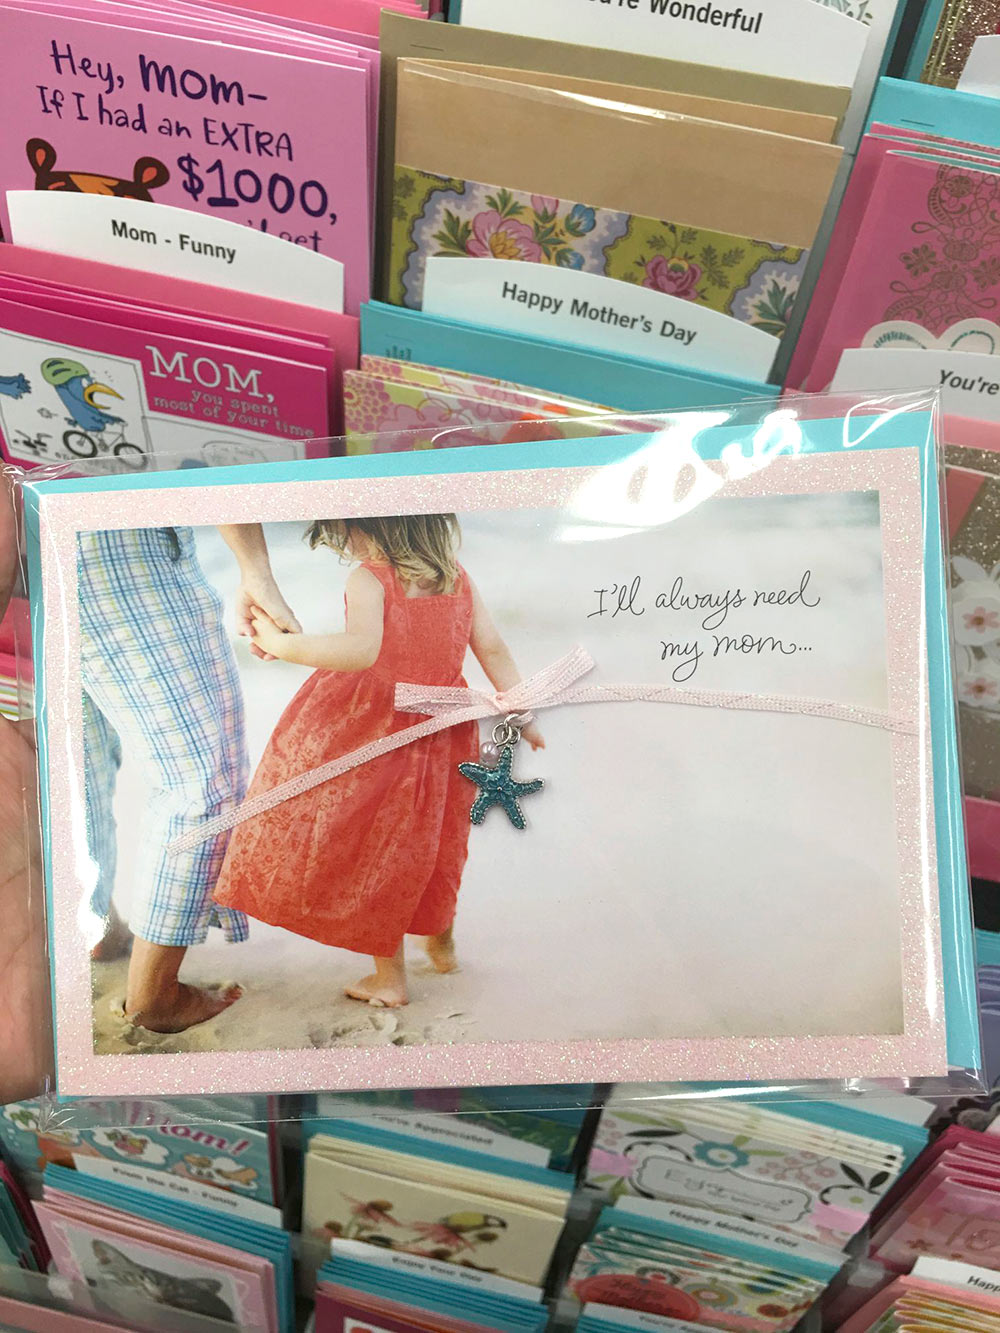 So sweet! This card has a keepsake necklace.